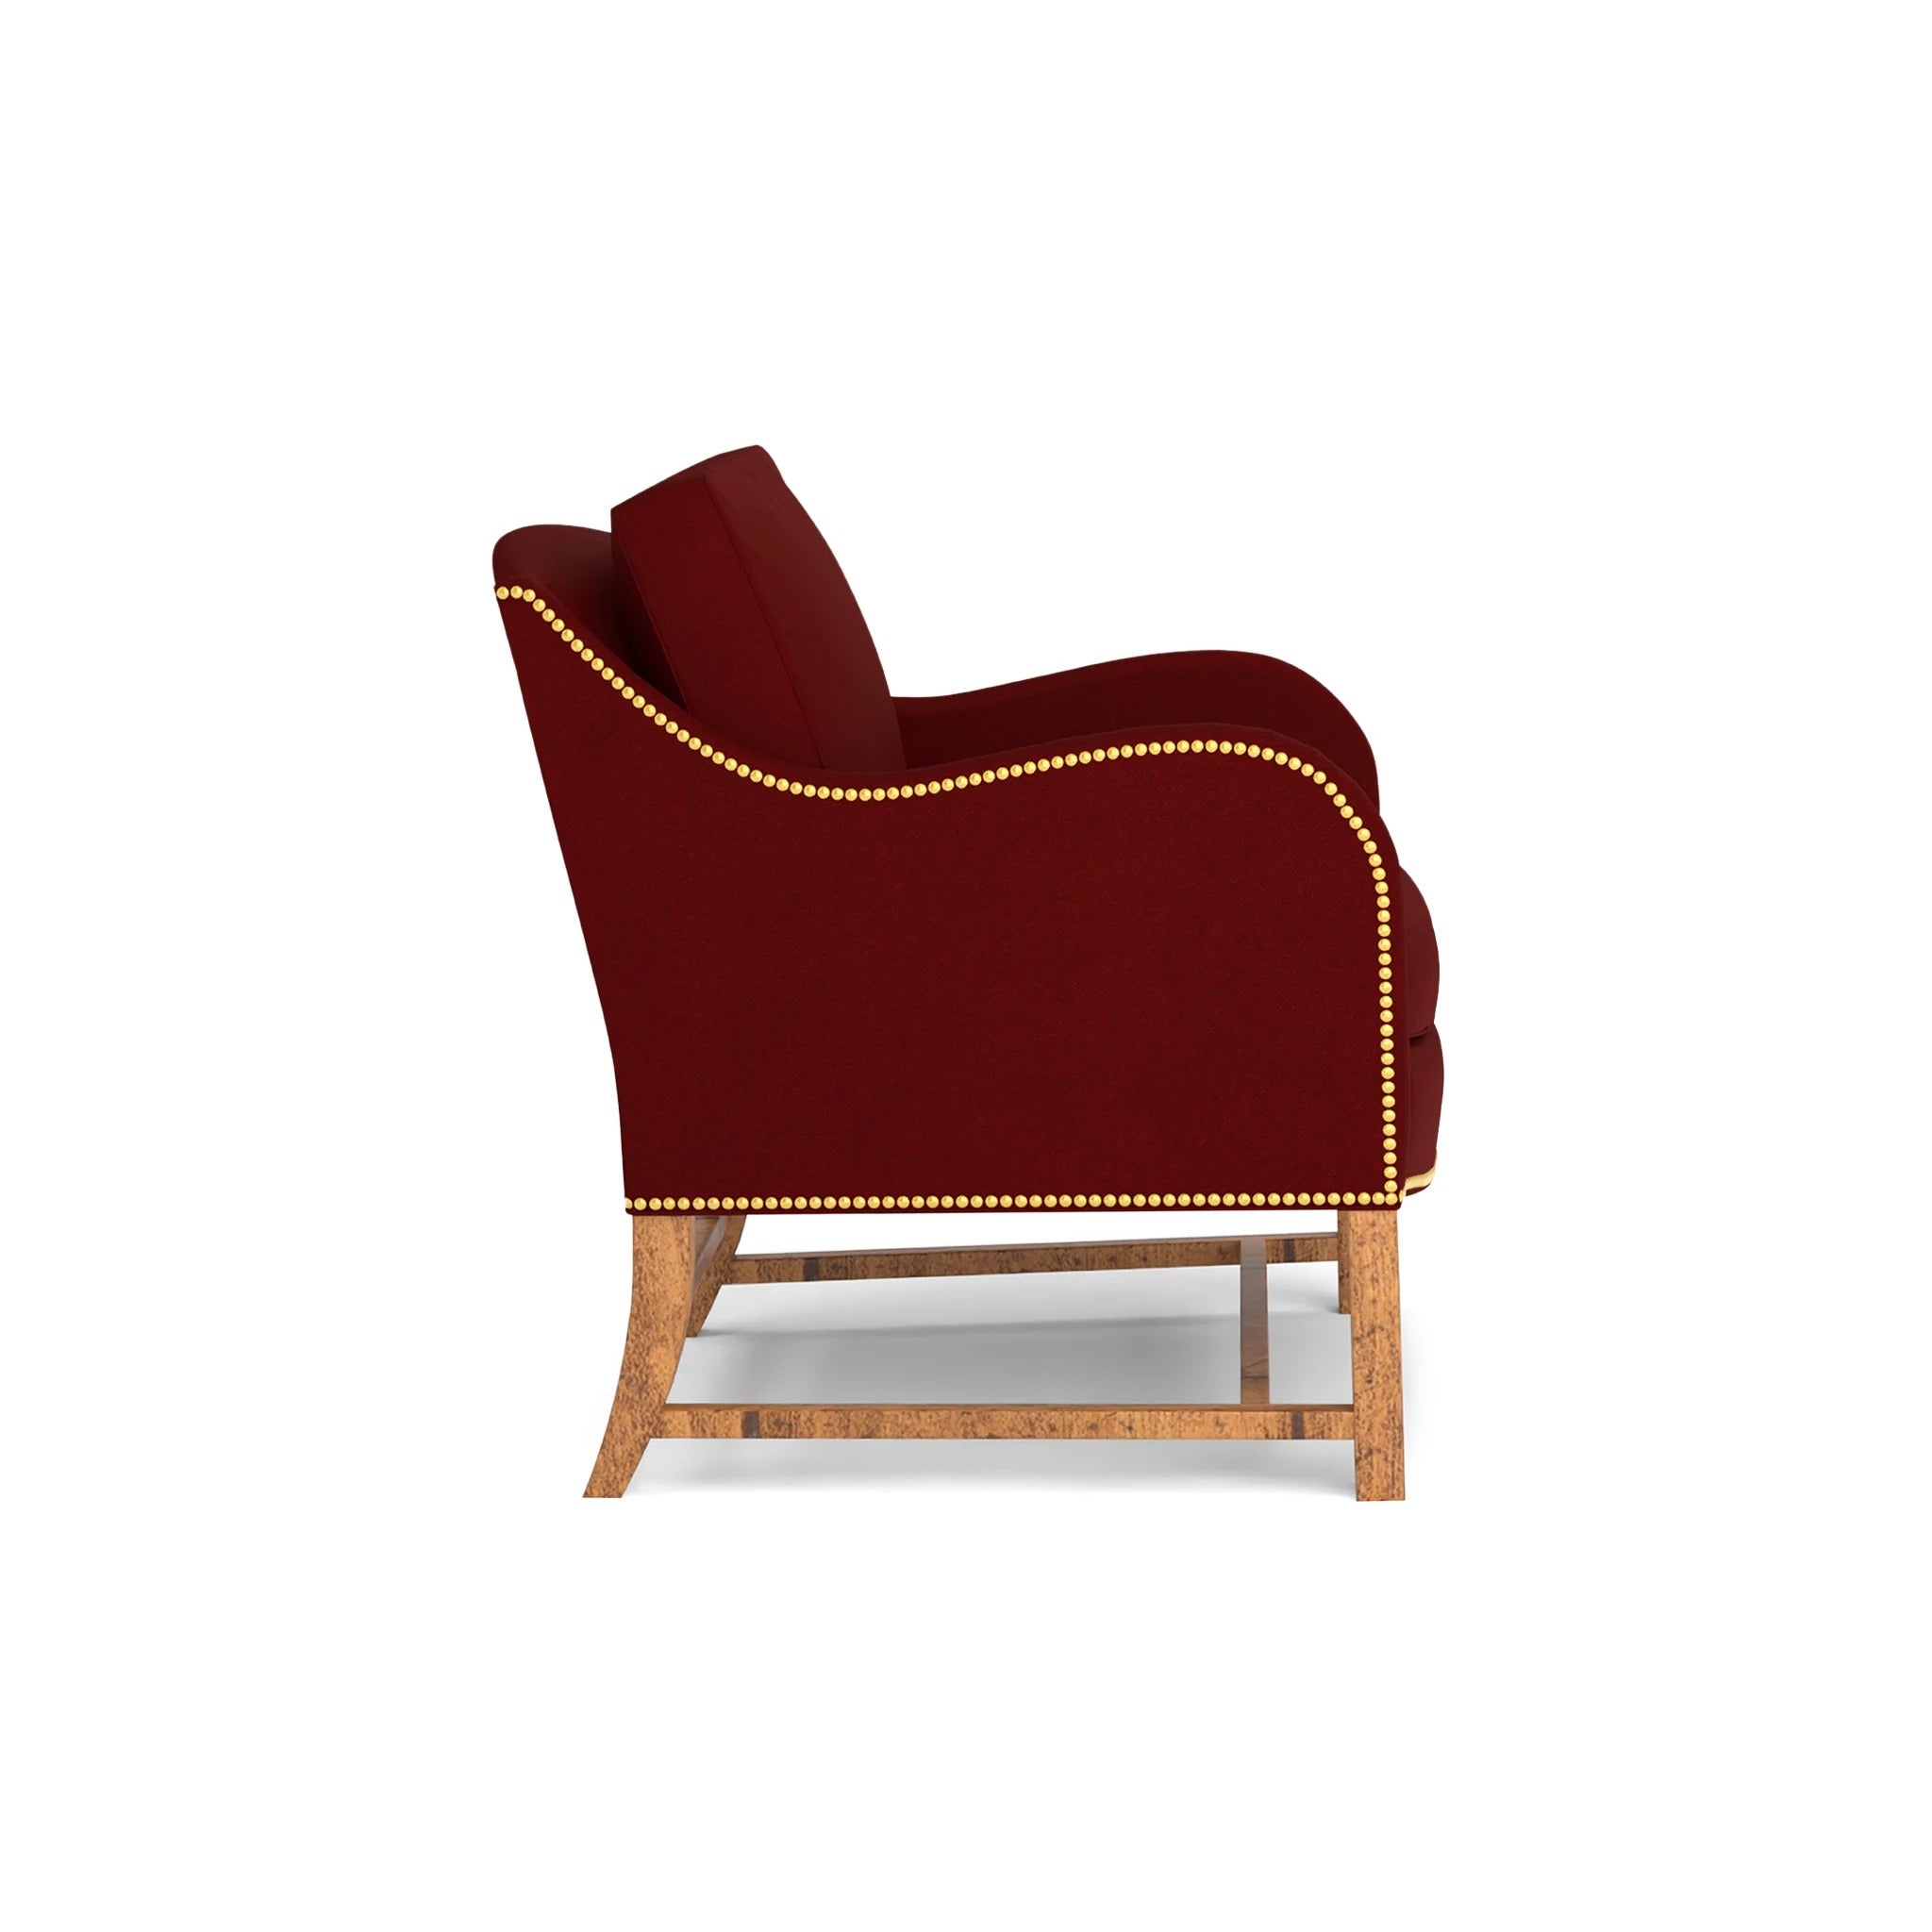 The Canterville Library Chair